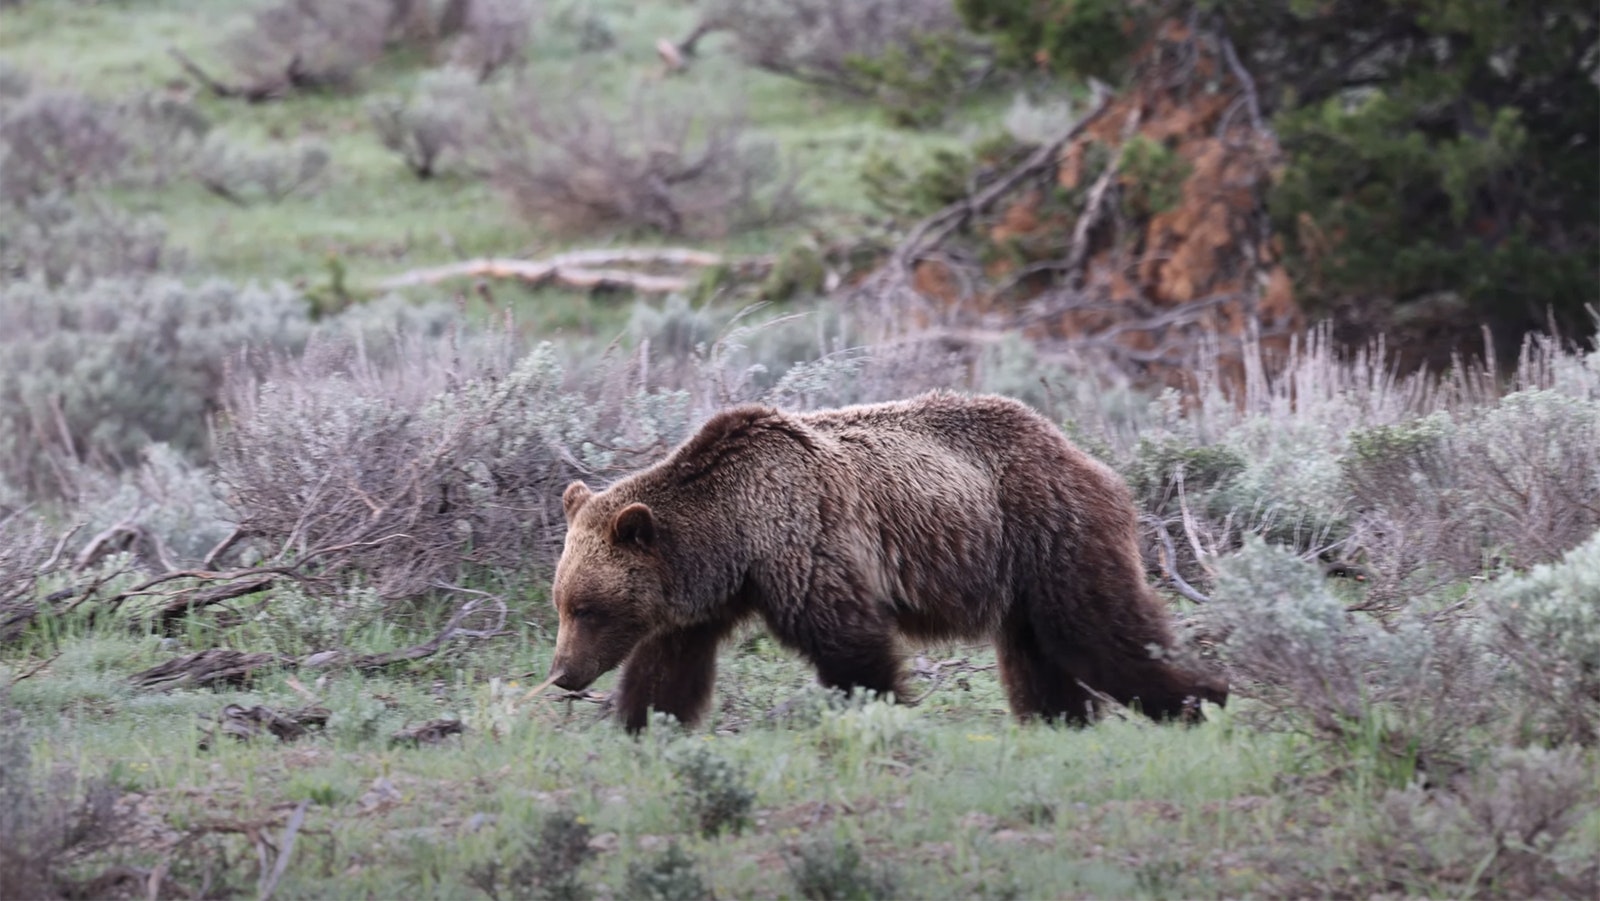 Wildlife observers and officials are keeping a keen eye out for Grizzly 610 after she was hit by a vehicle.